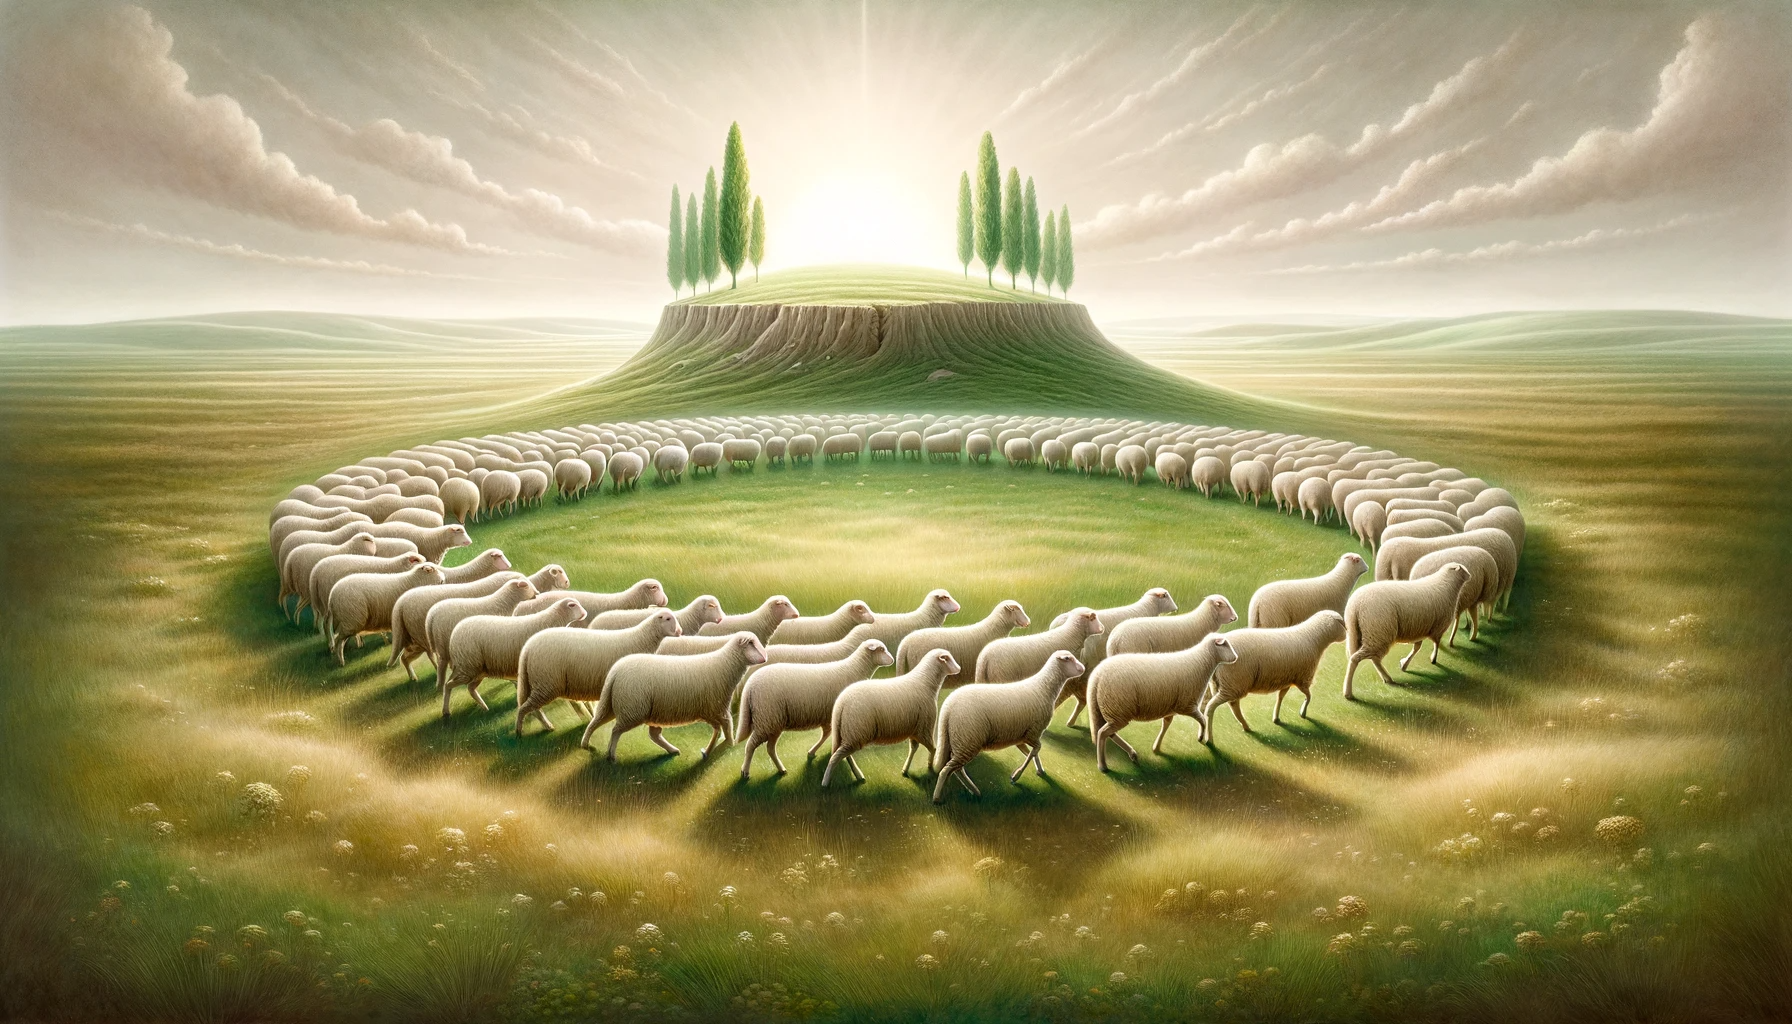 Sheep Walking in Circles: Understanding the Biblical Meaning